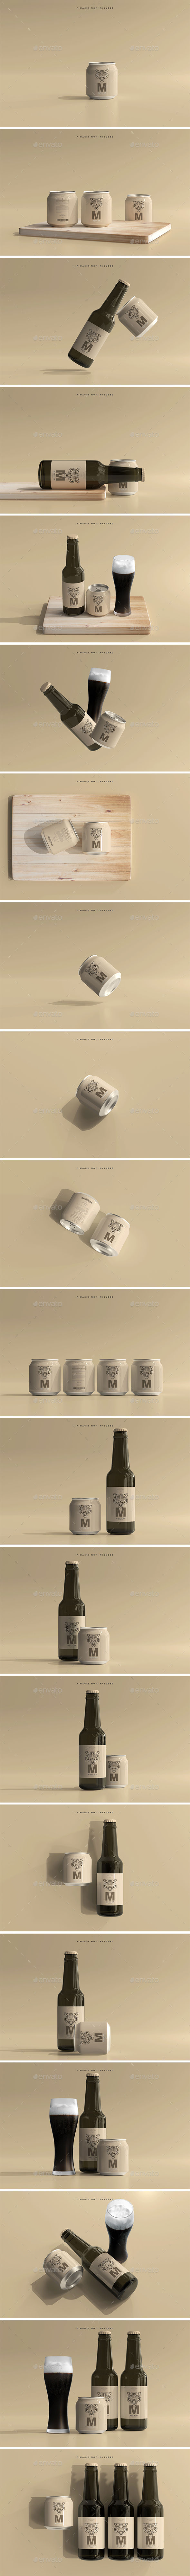 Stubby Soda or Beer Can and Bottle Mockup